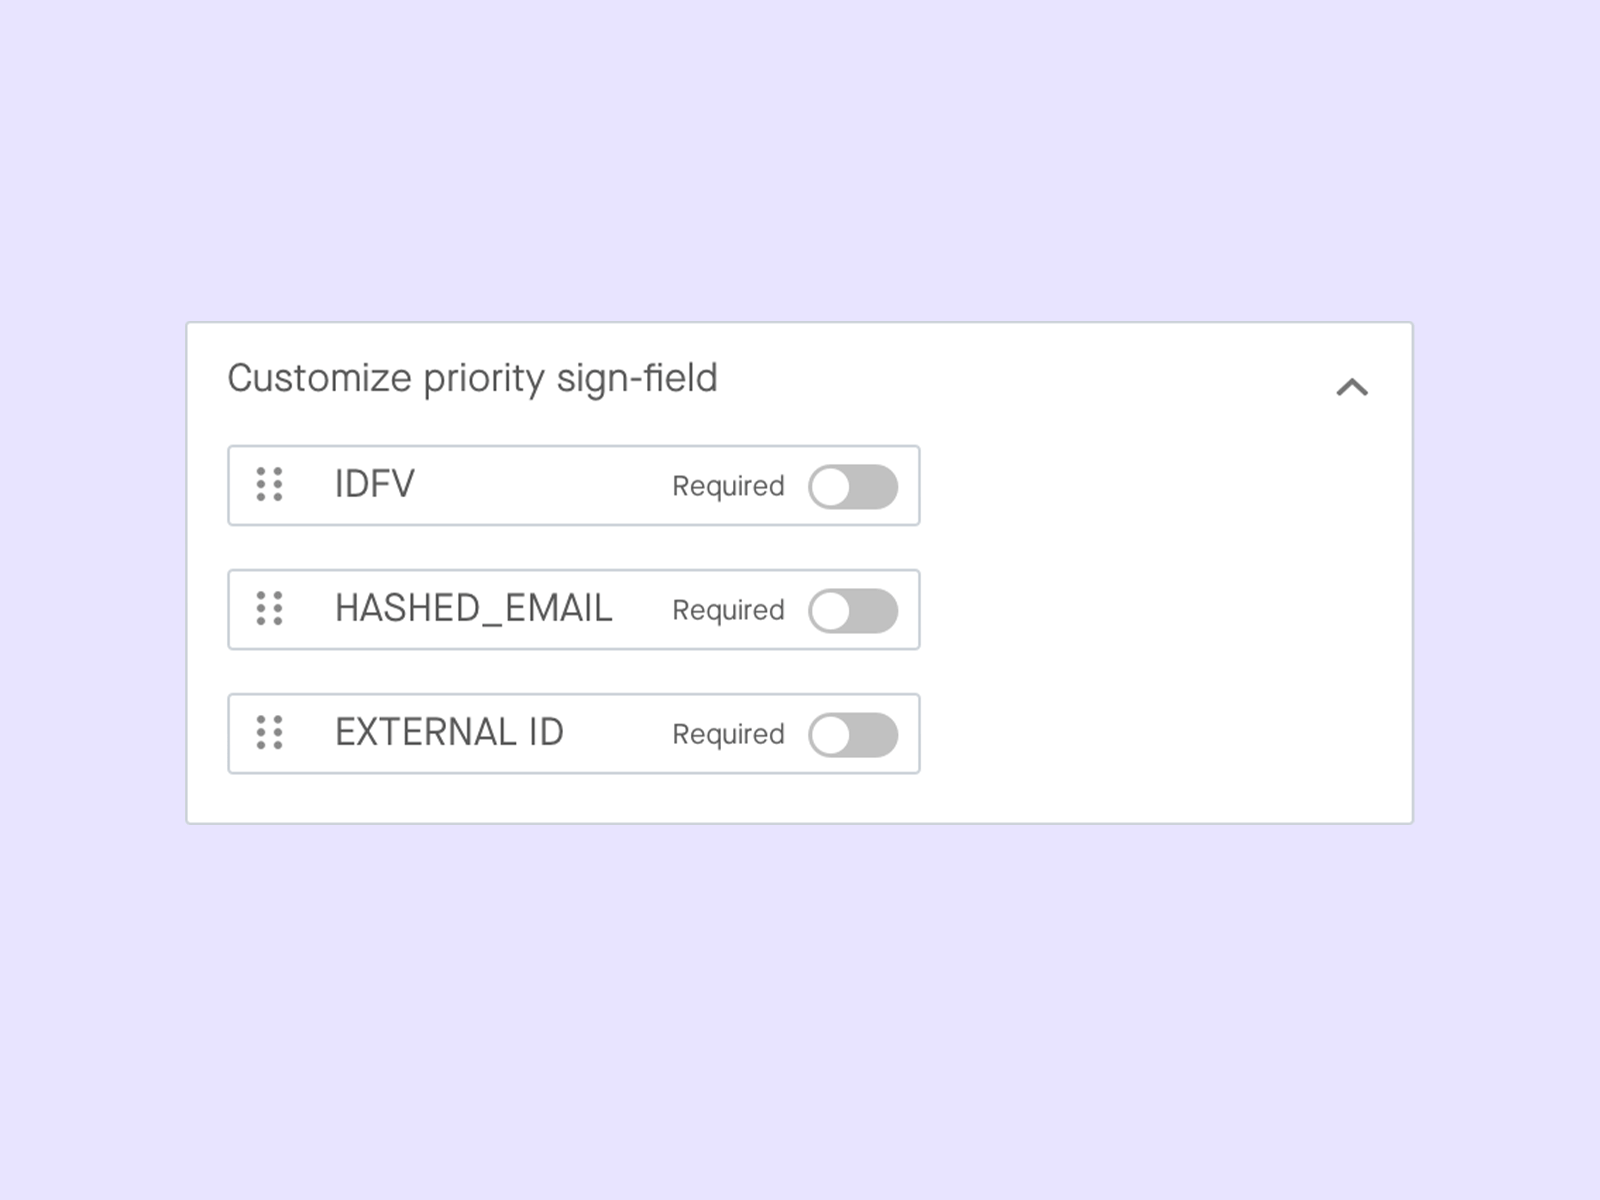 Customize priority sign-field